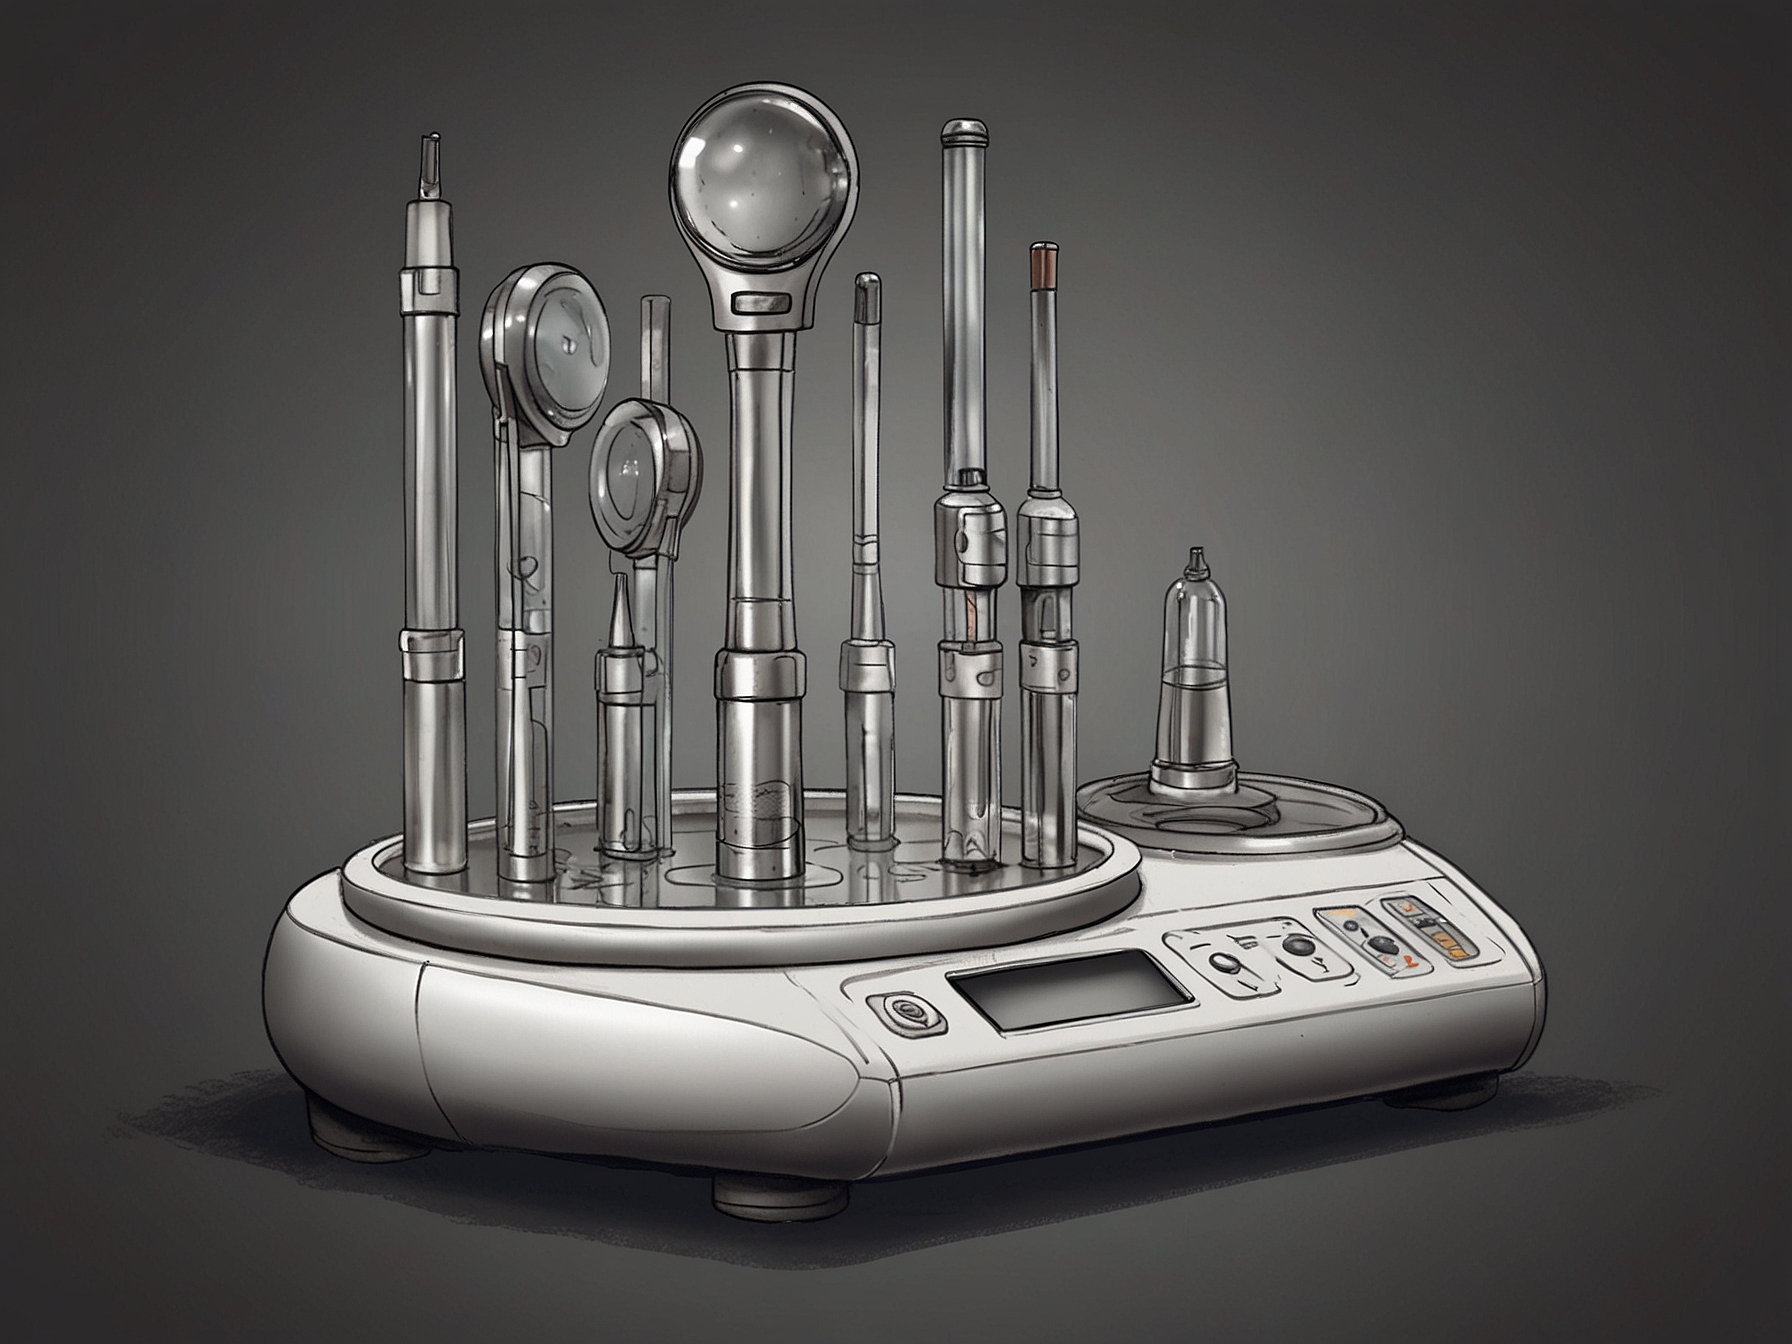 A close-up view of fertility treatment equipment used in an IVF procedure.